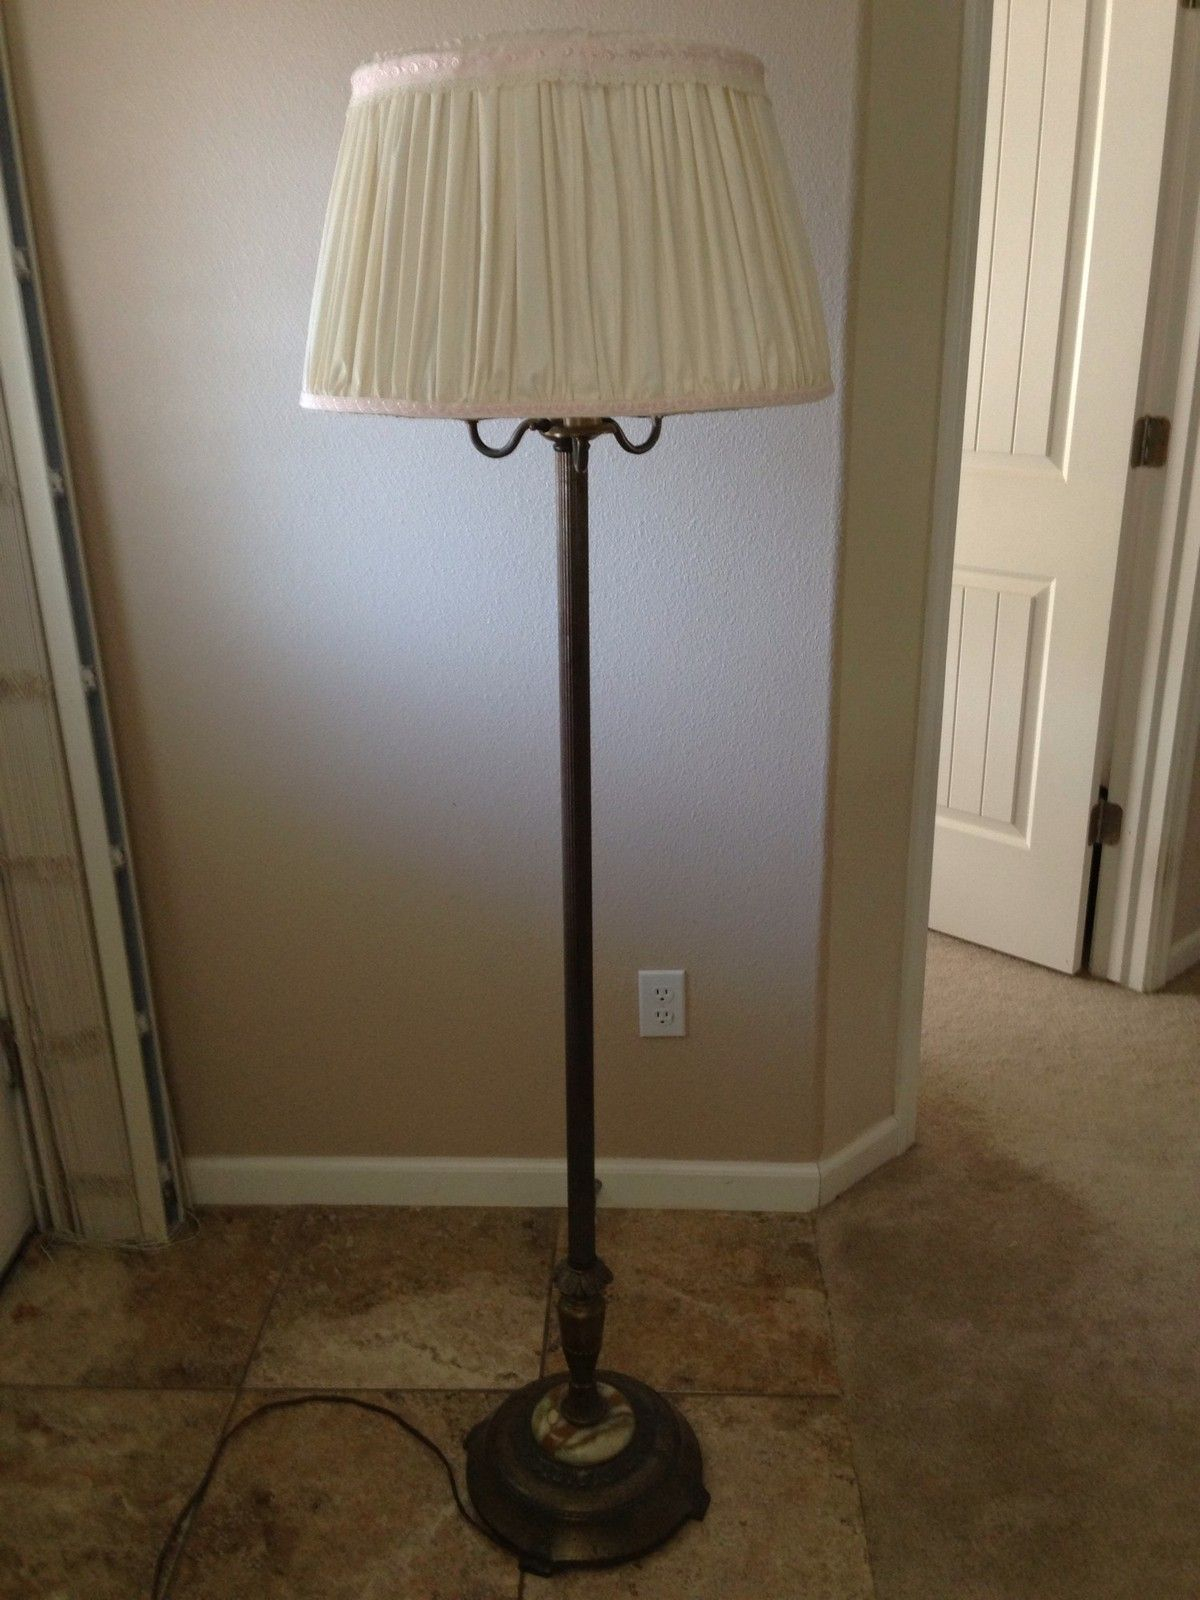 Antique Candelabra Torchiere Floor Lamp With Marble Base pertaining to measurements 1200 X 1600